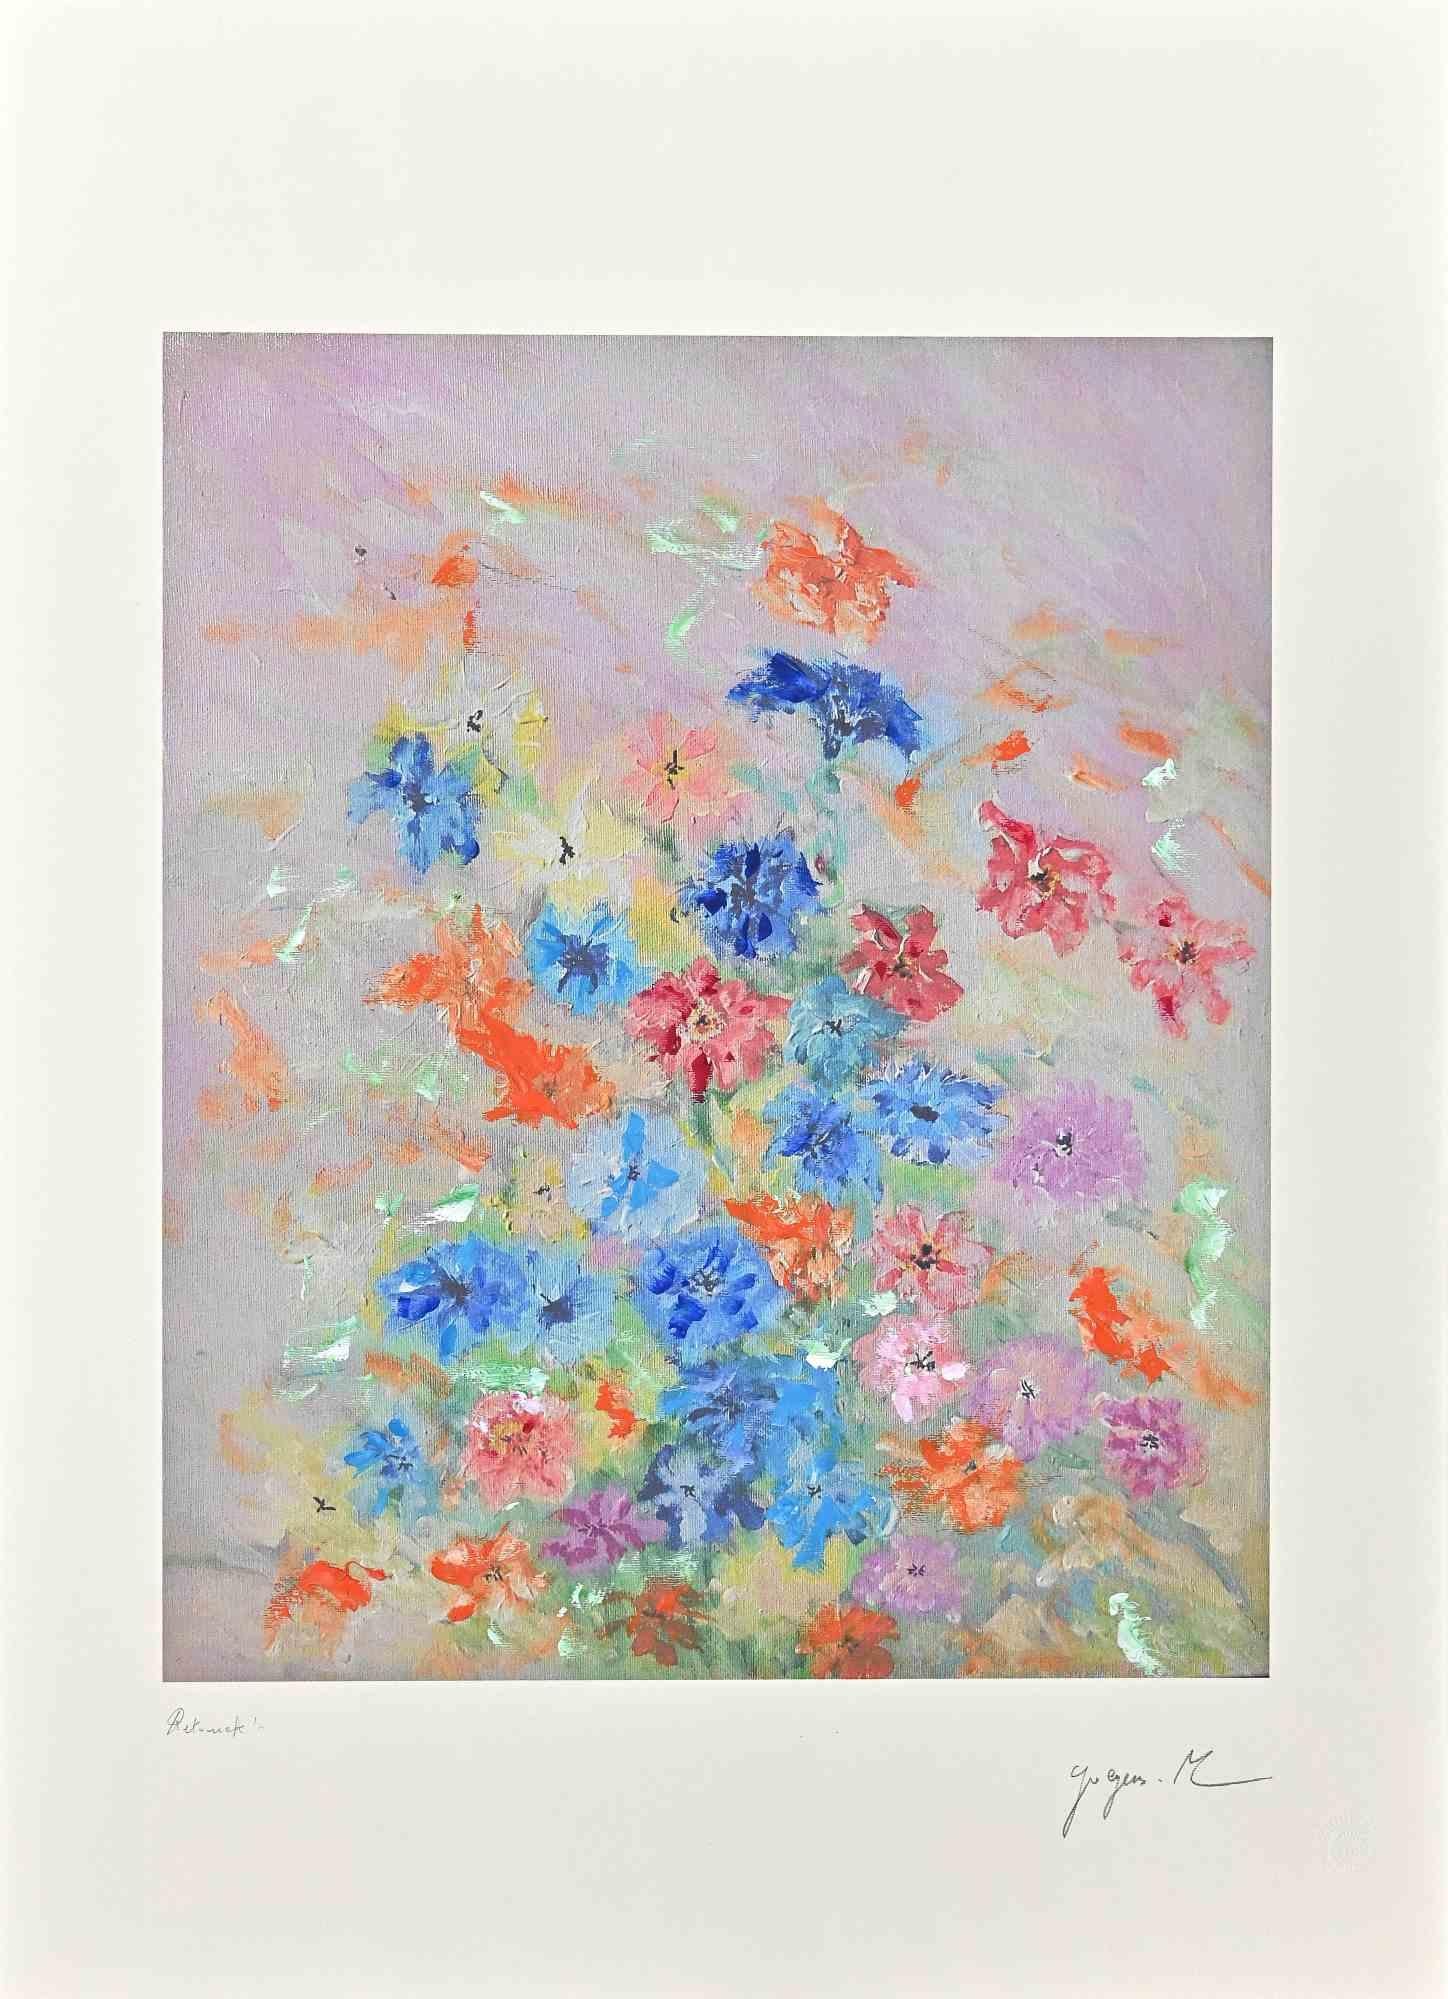 Flowers - Digigraph Print by Martine Goeyens - Late 20th Century